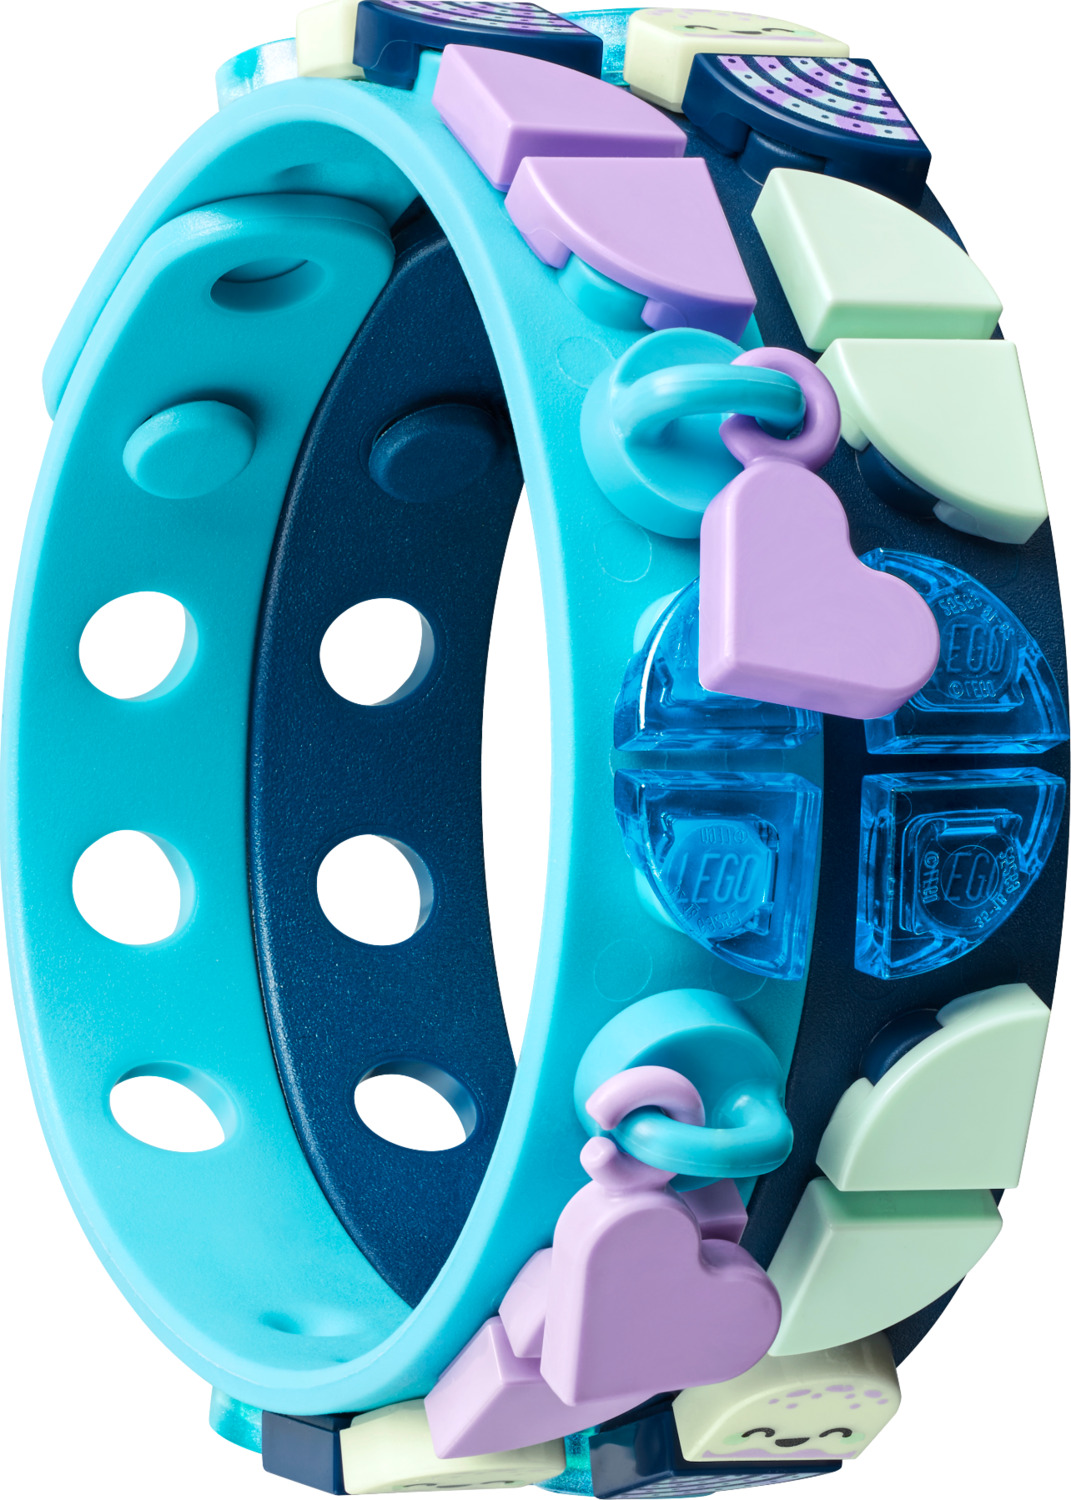 LEGO DOTS: Into the Deep Bracelets with Charms